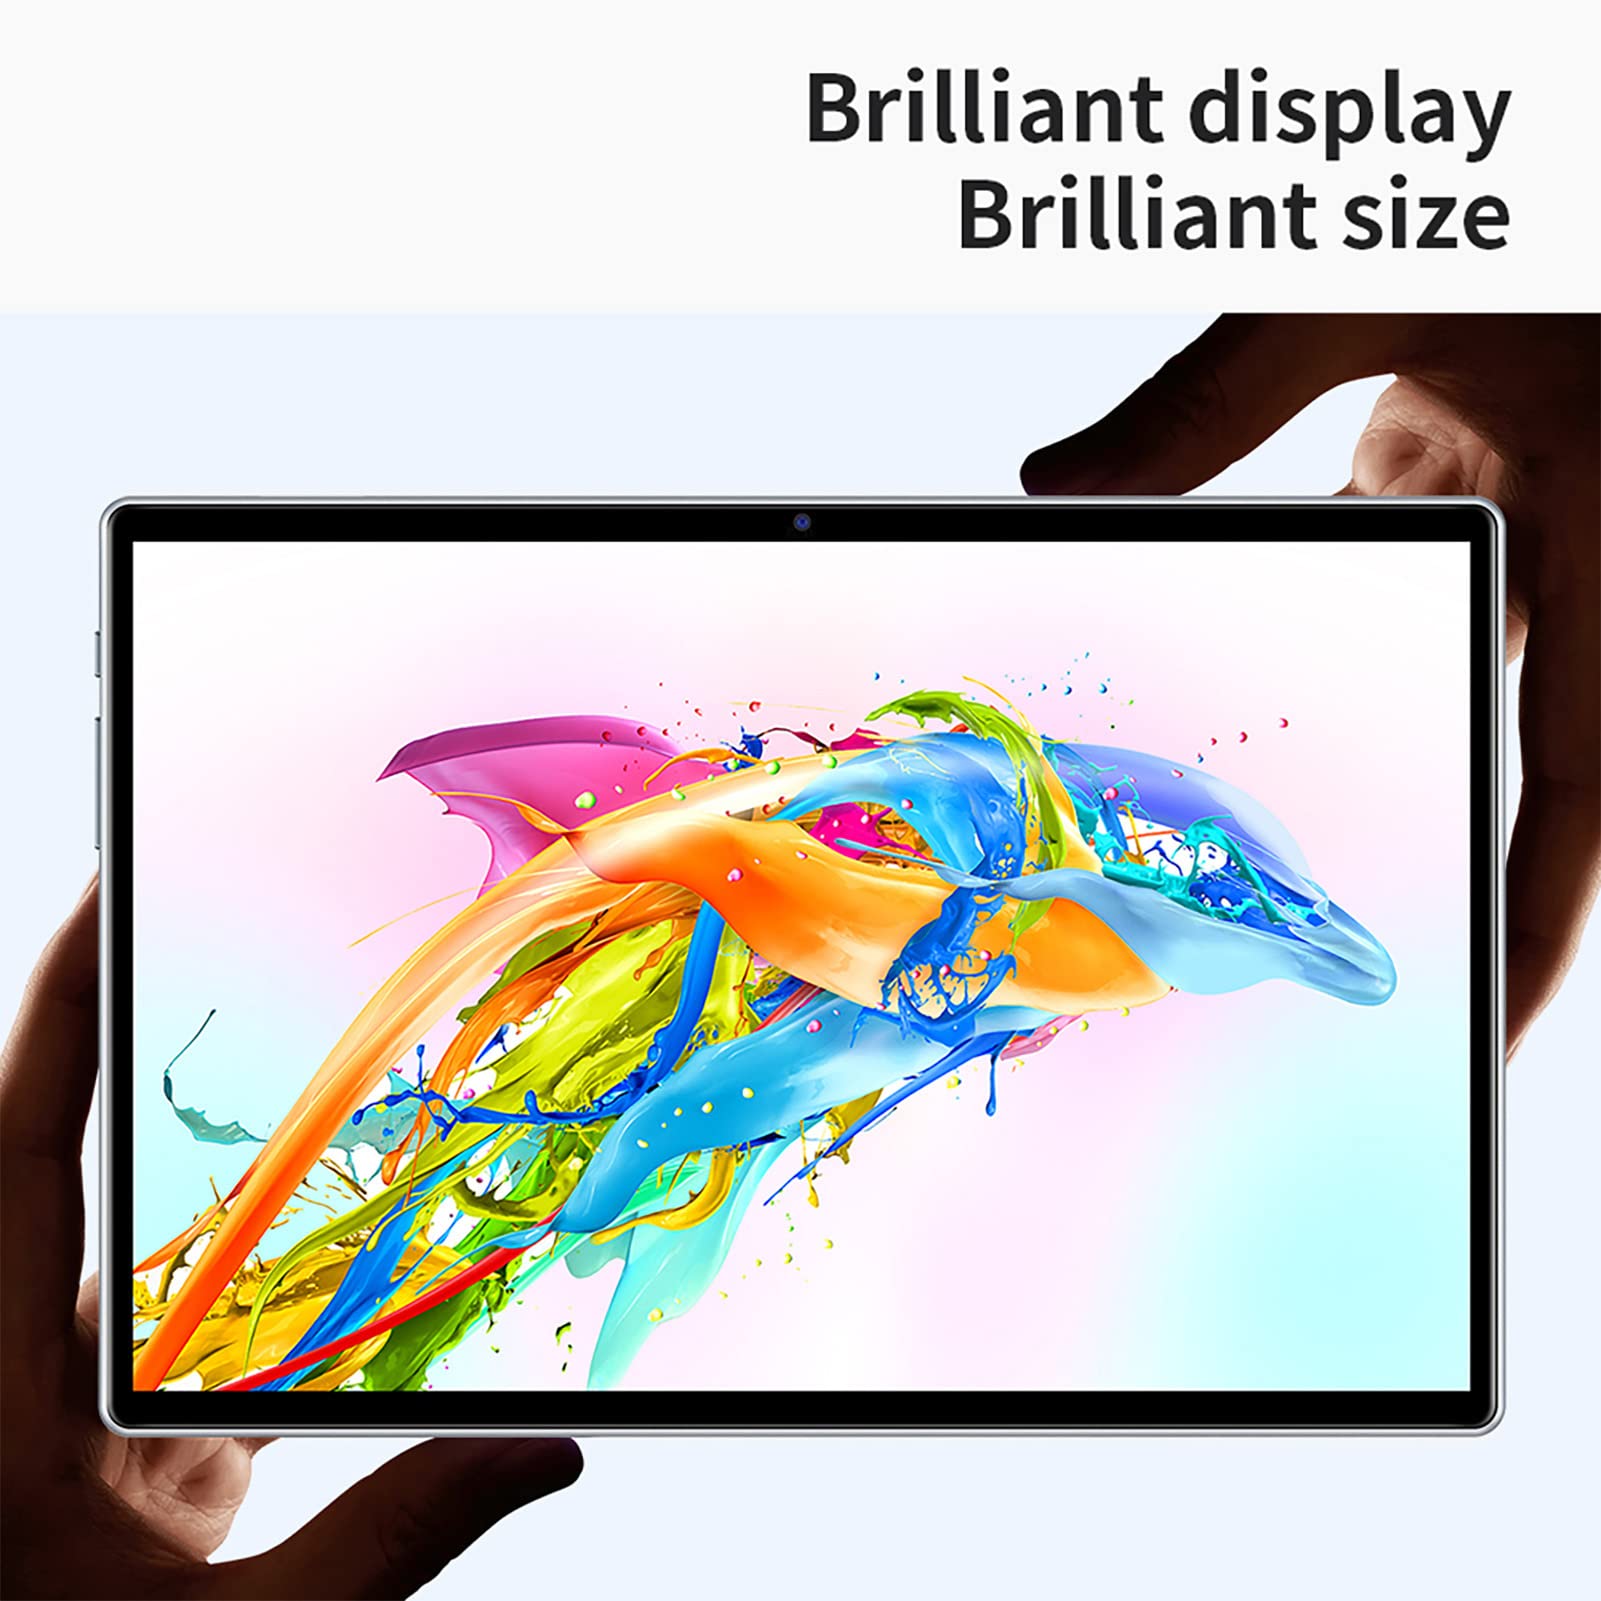 10Inch Tablet for Android 11, 1920x1200 Resolution HD IPS Display 8GB RAM 128GB ROM MT6753 Octa Core CPU, Gaming Tablet for Family Office, Silver